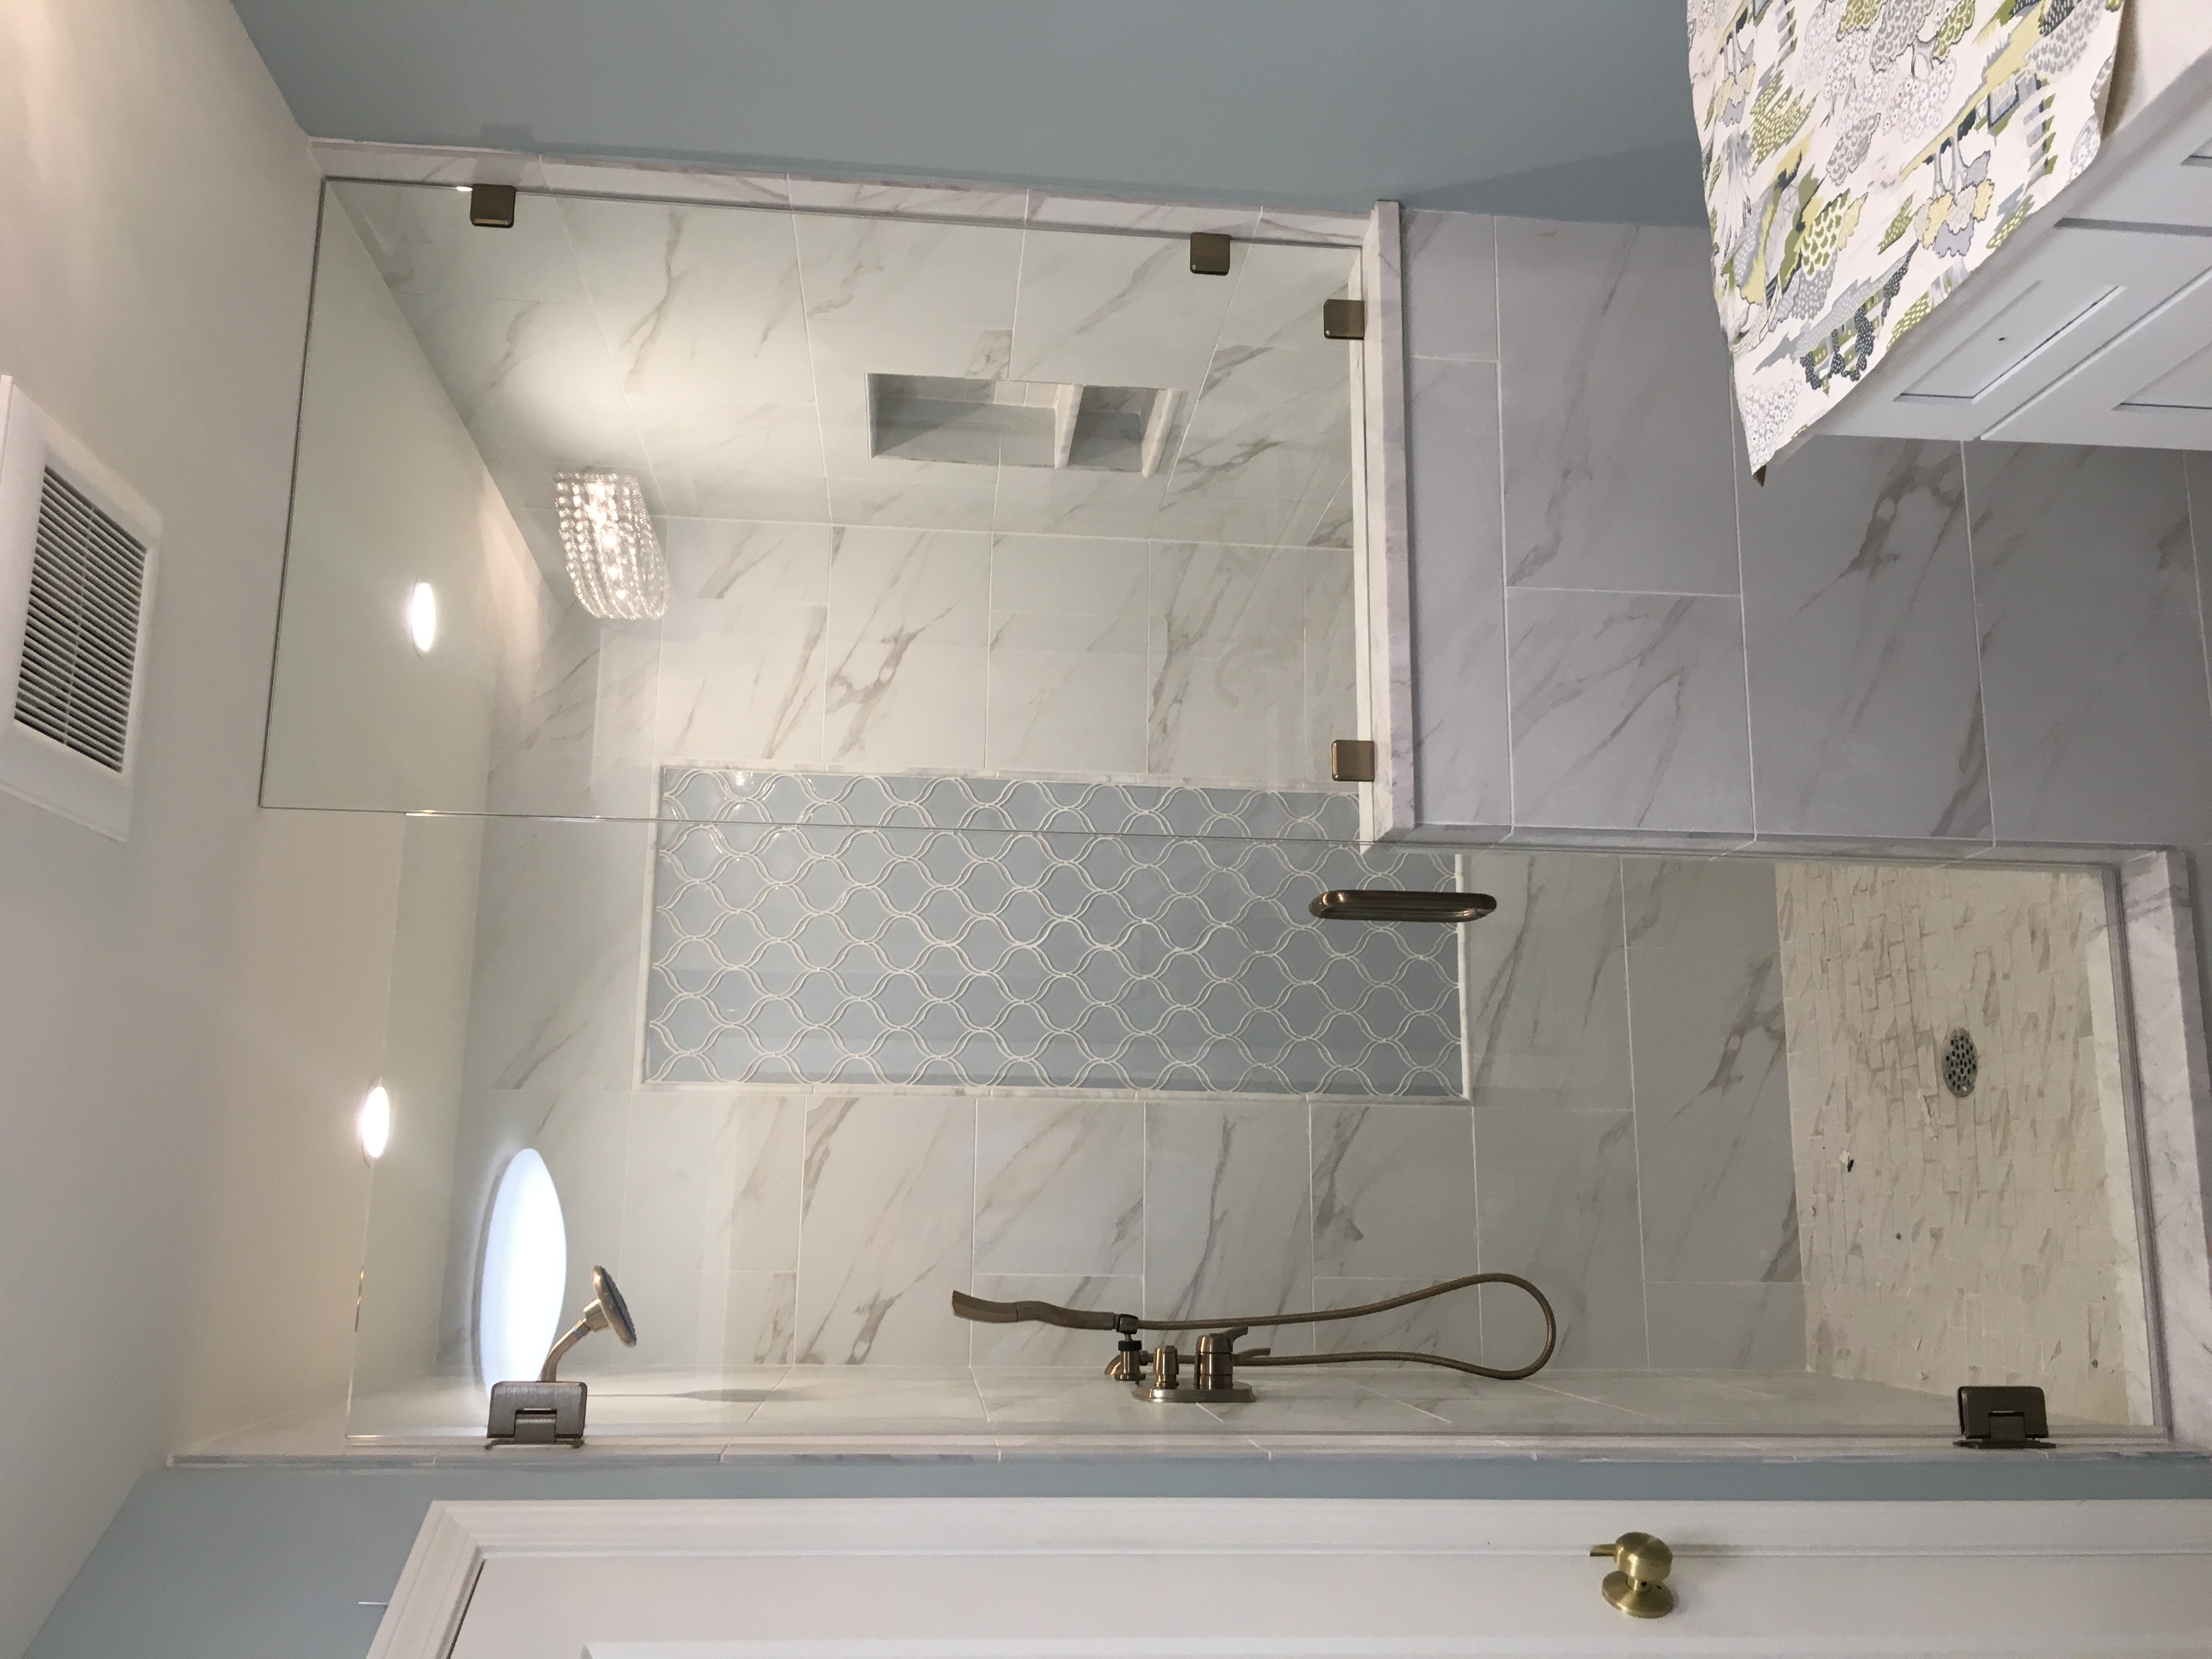 Shower Doors - Shelving Systems Plus